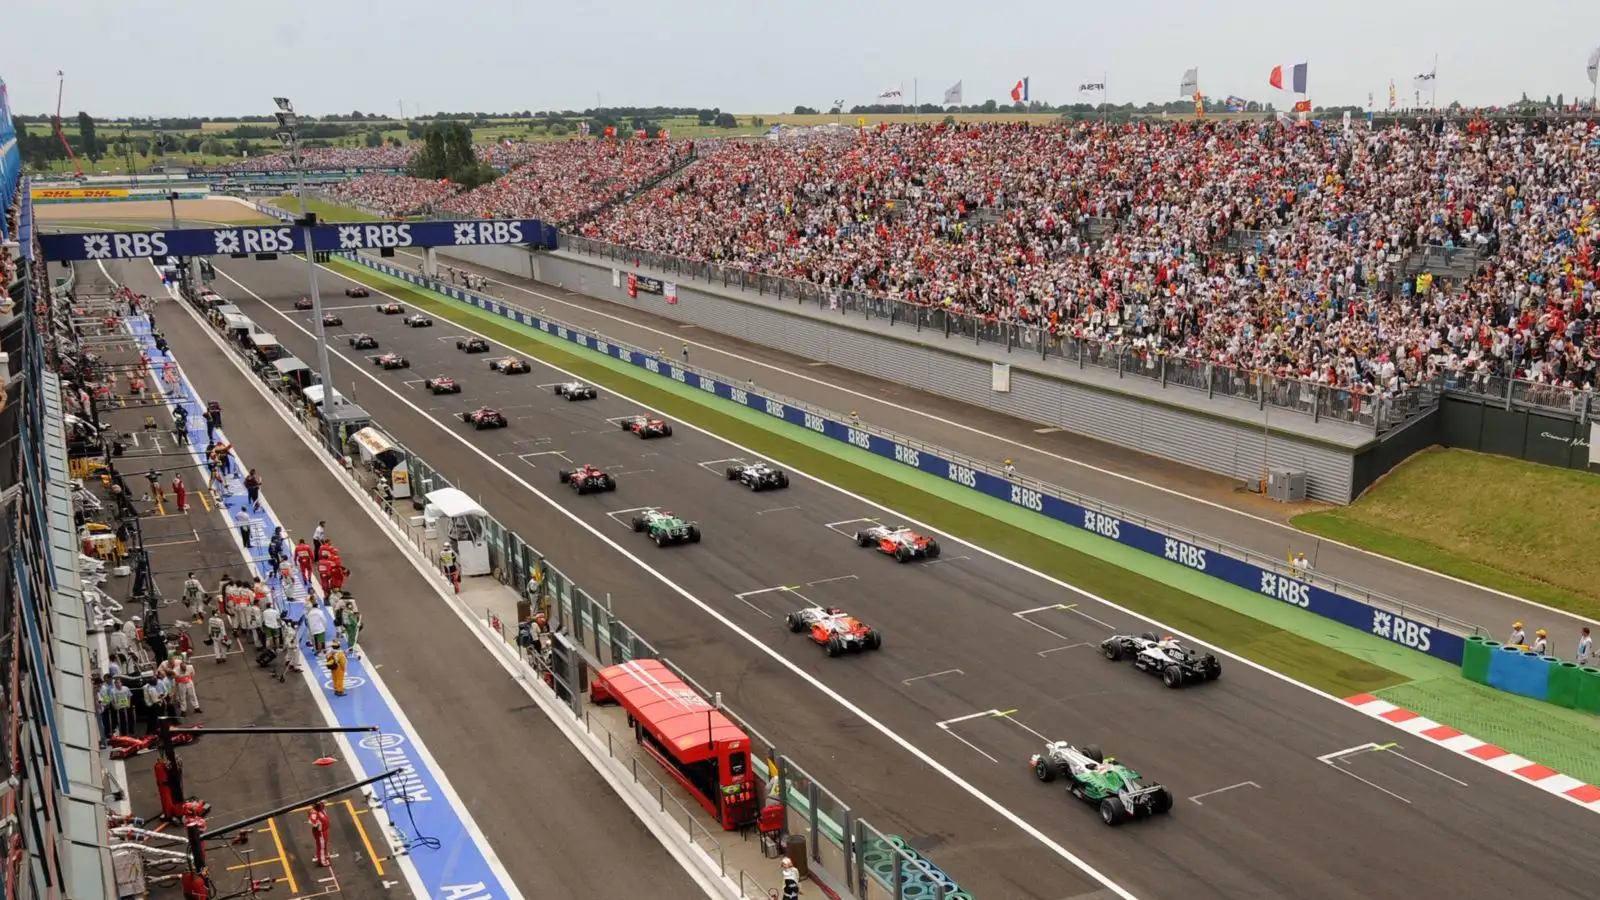 The grid line up for the F1 2008 French Grand Prix